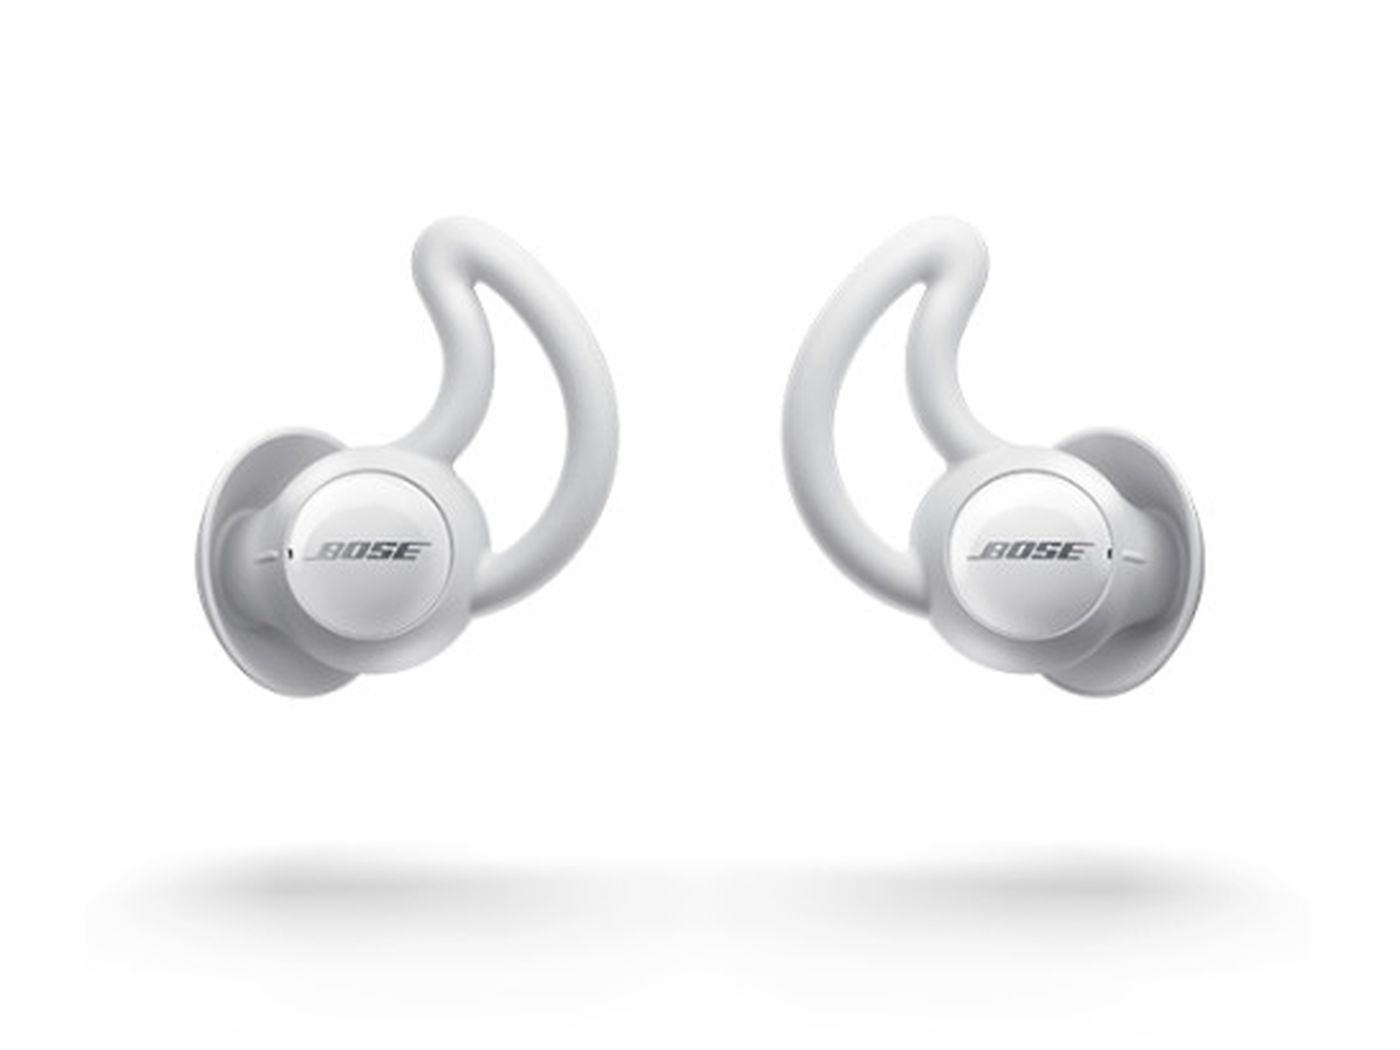 Slibende kanal Bule Bose Sleepbuds can silence snores and barking dogs - The Verge